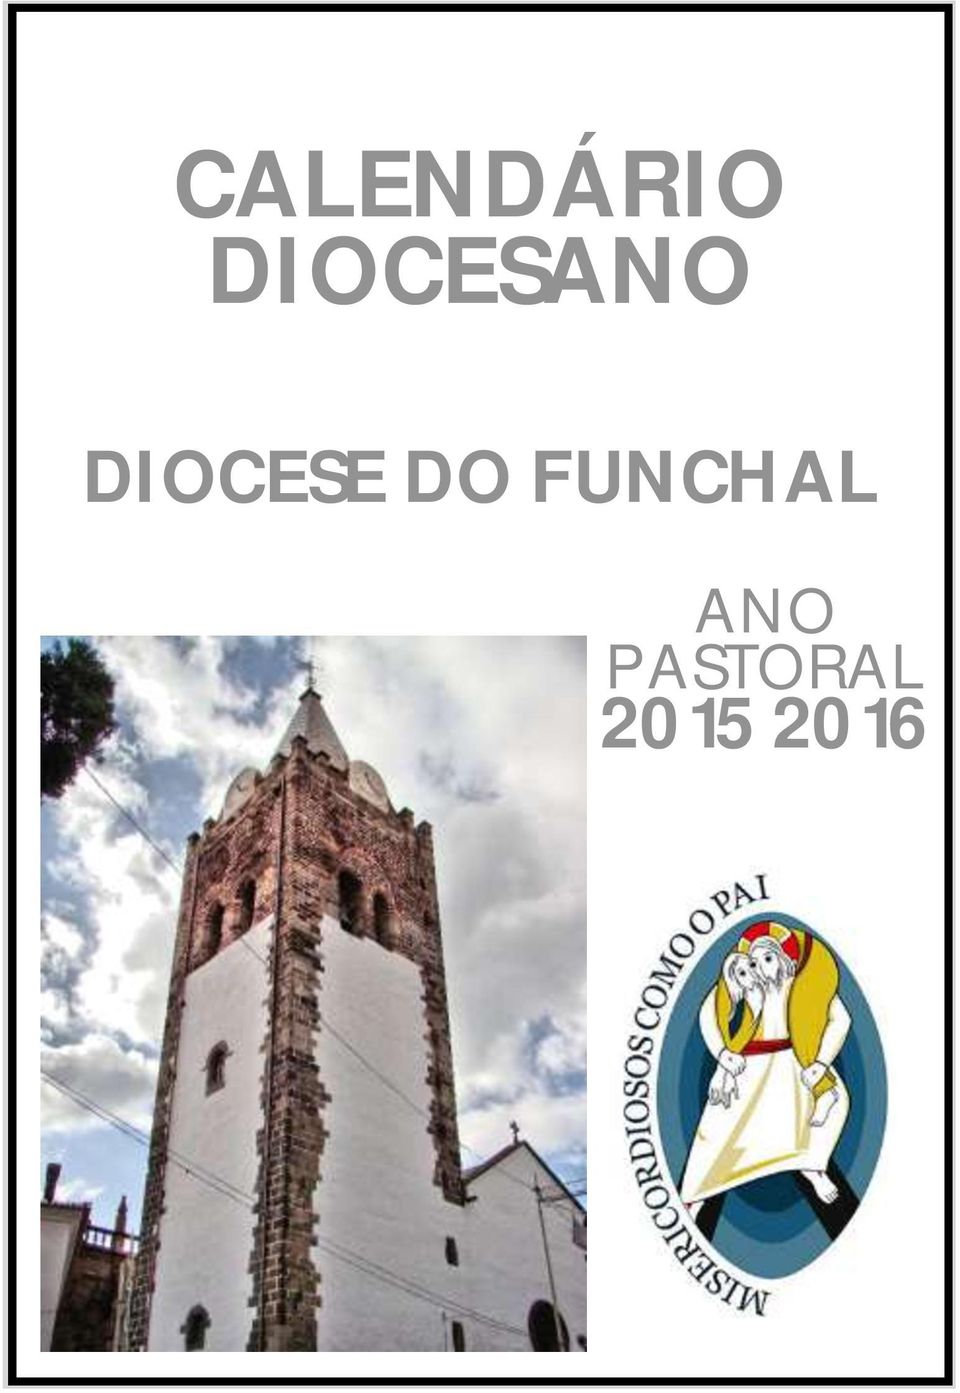 DIOCESE DO